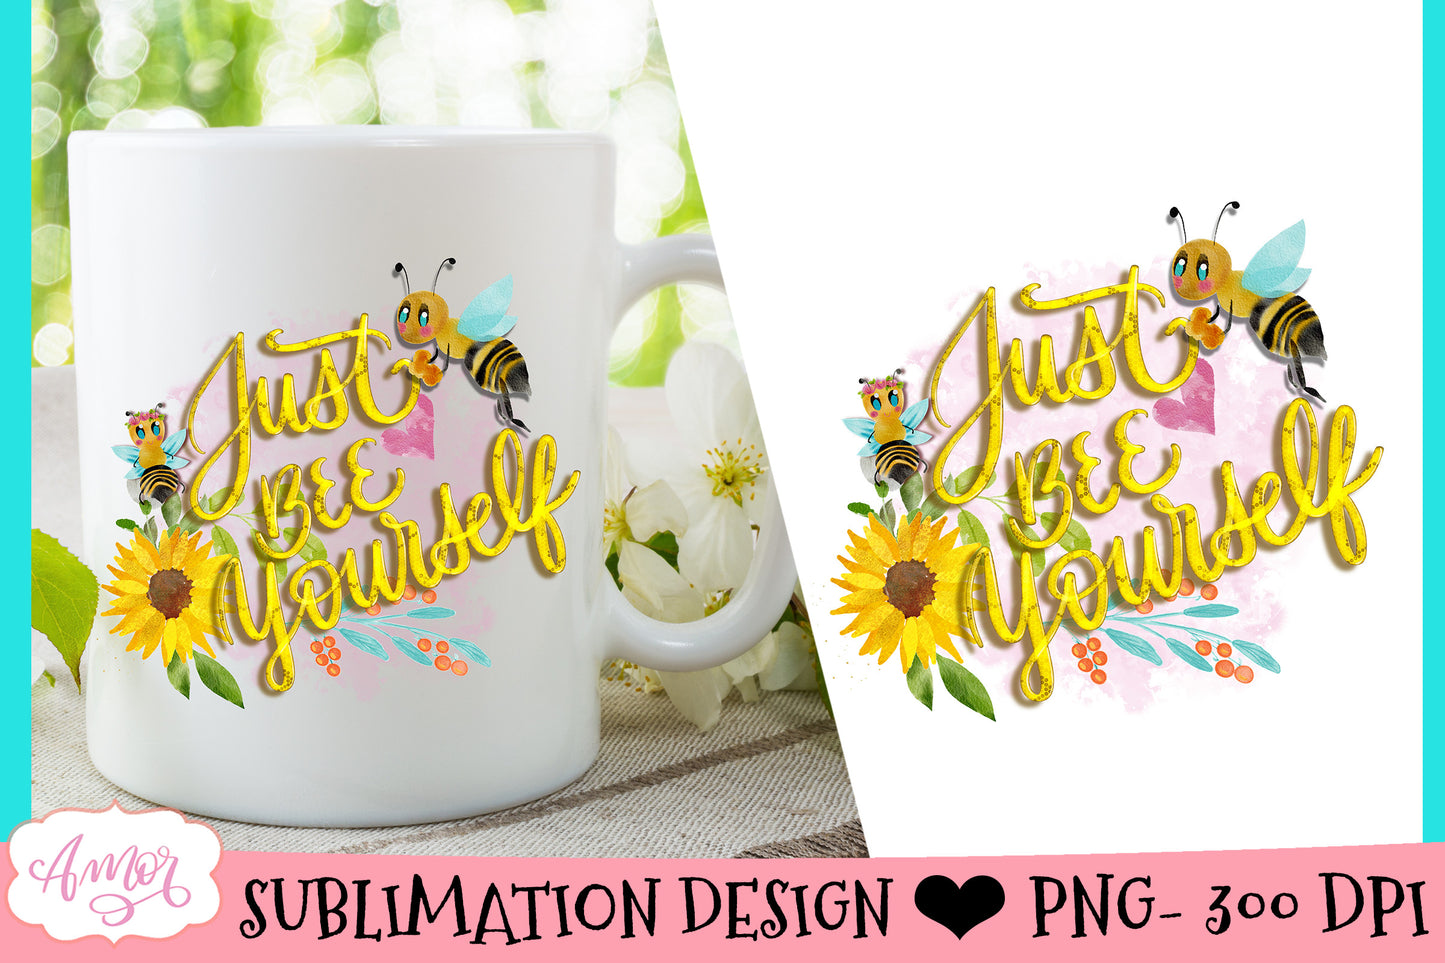 Just Bee Yourself cute sublimation design for T-shirts